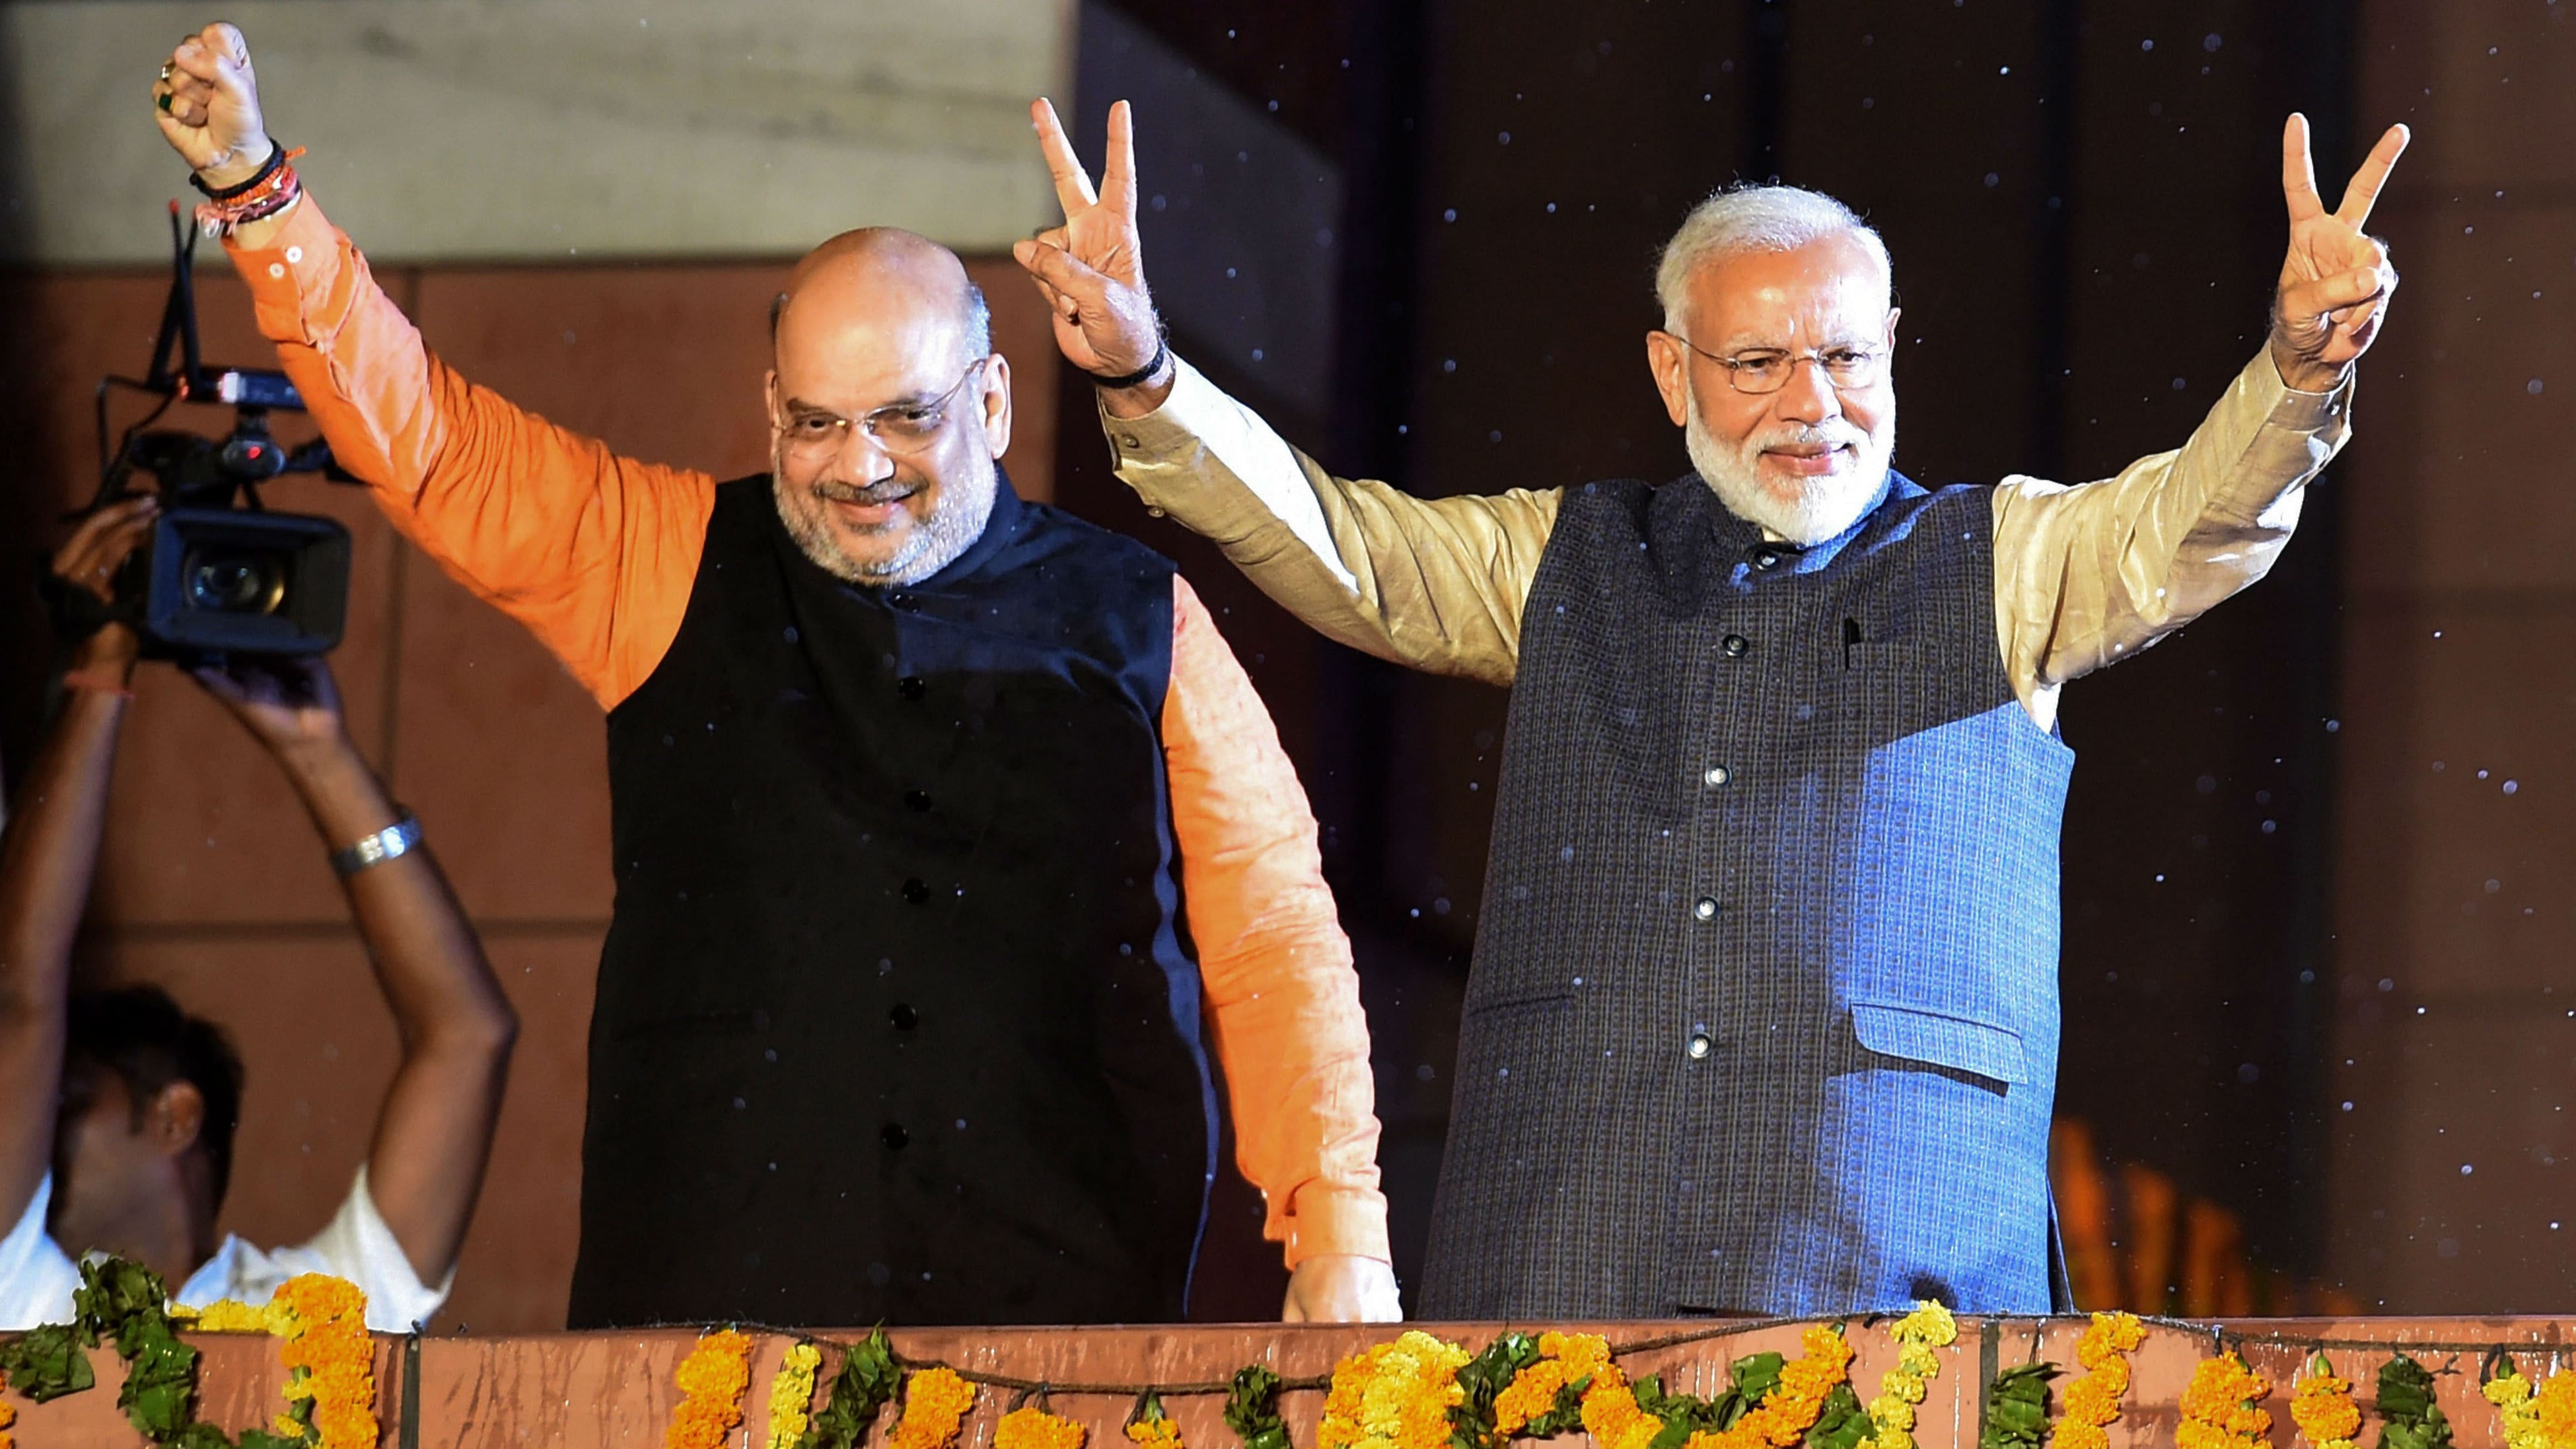 PM Modi, Amit Shah hold meeting to finalise members of ministry before oath ceremony